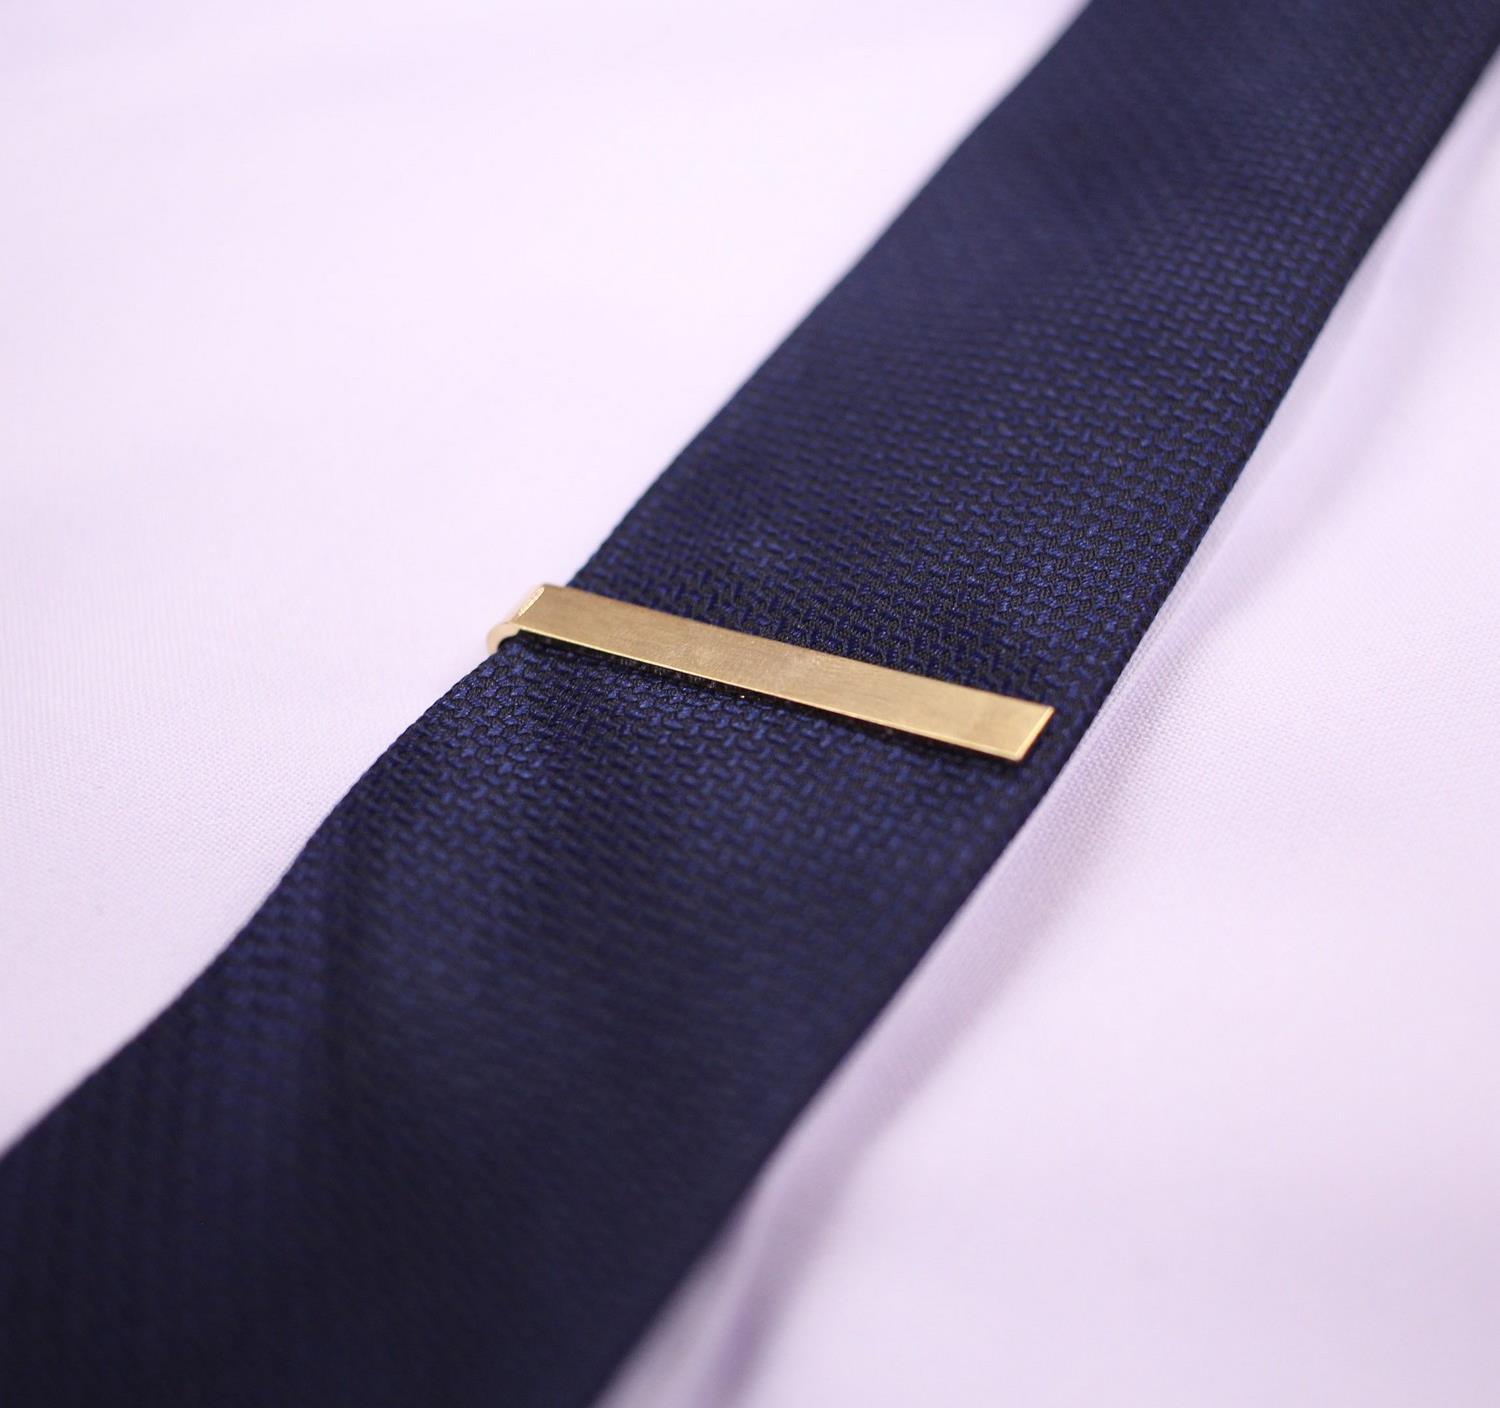 Gold Tie Clip - Tailor Made Suits